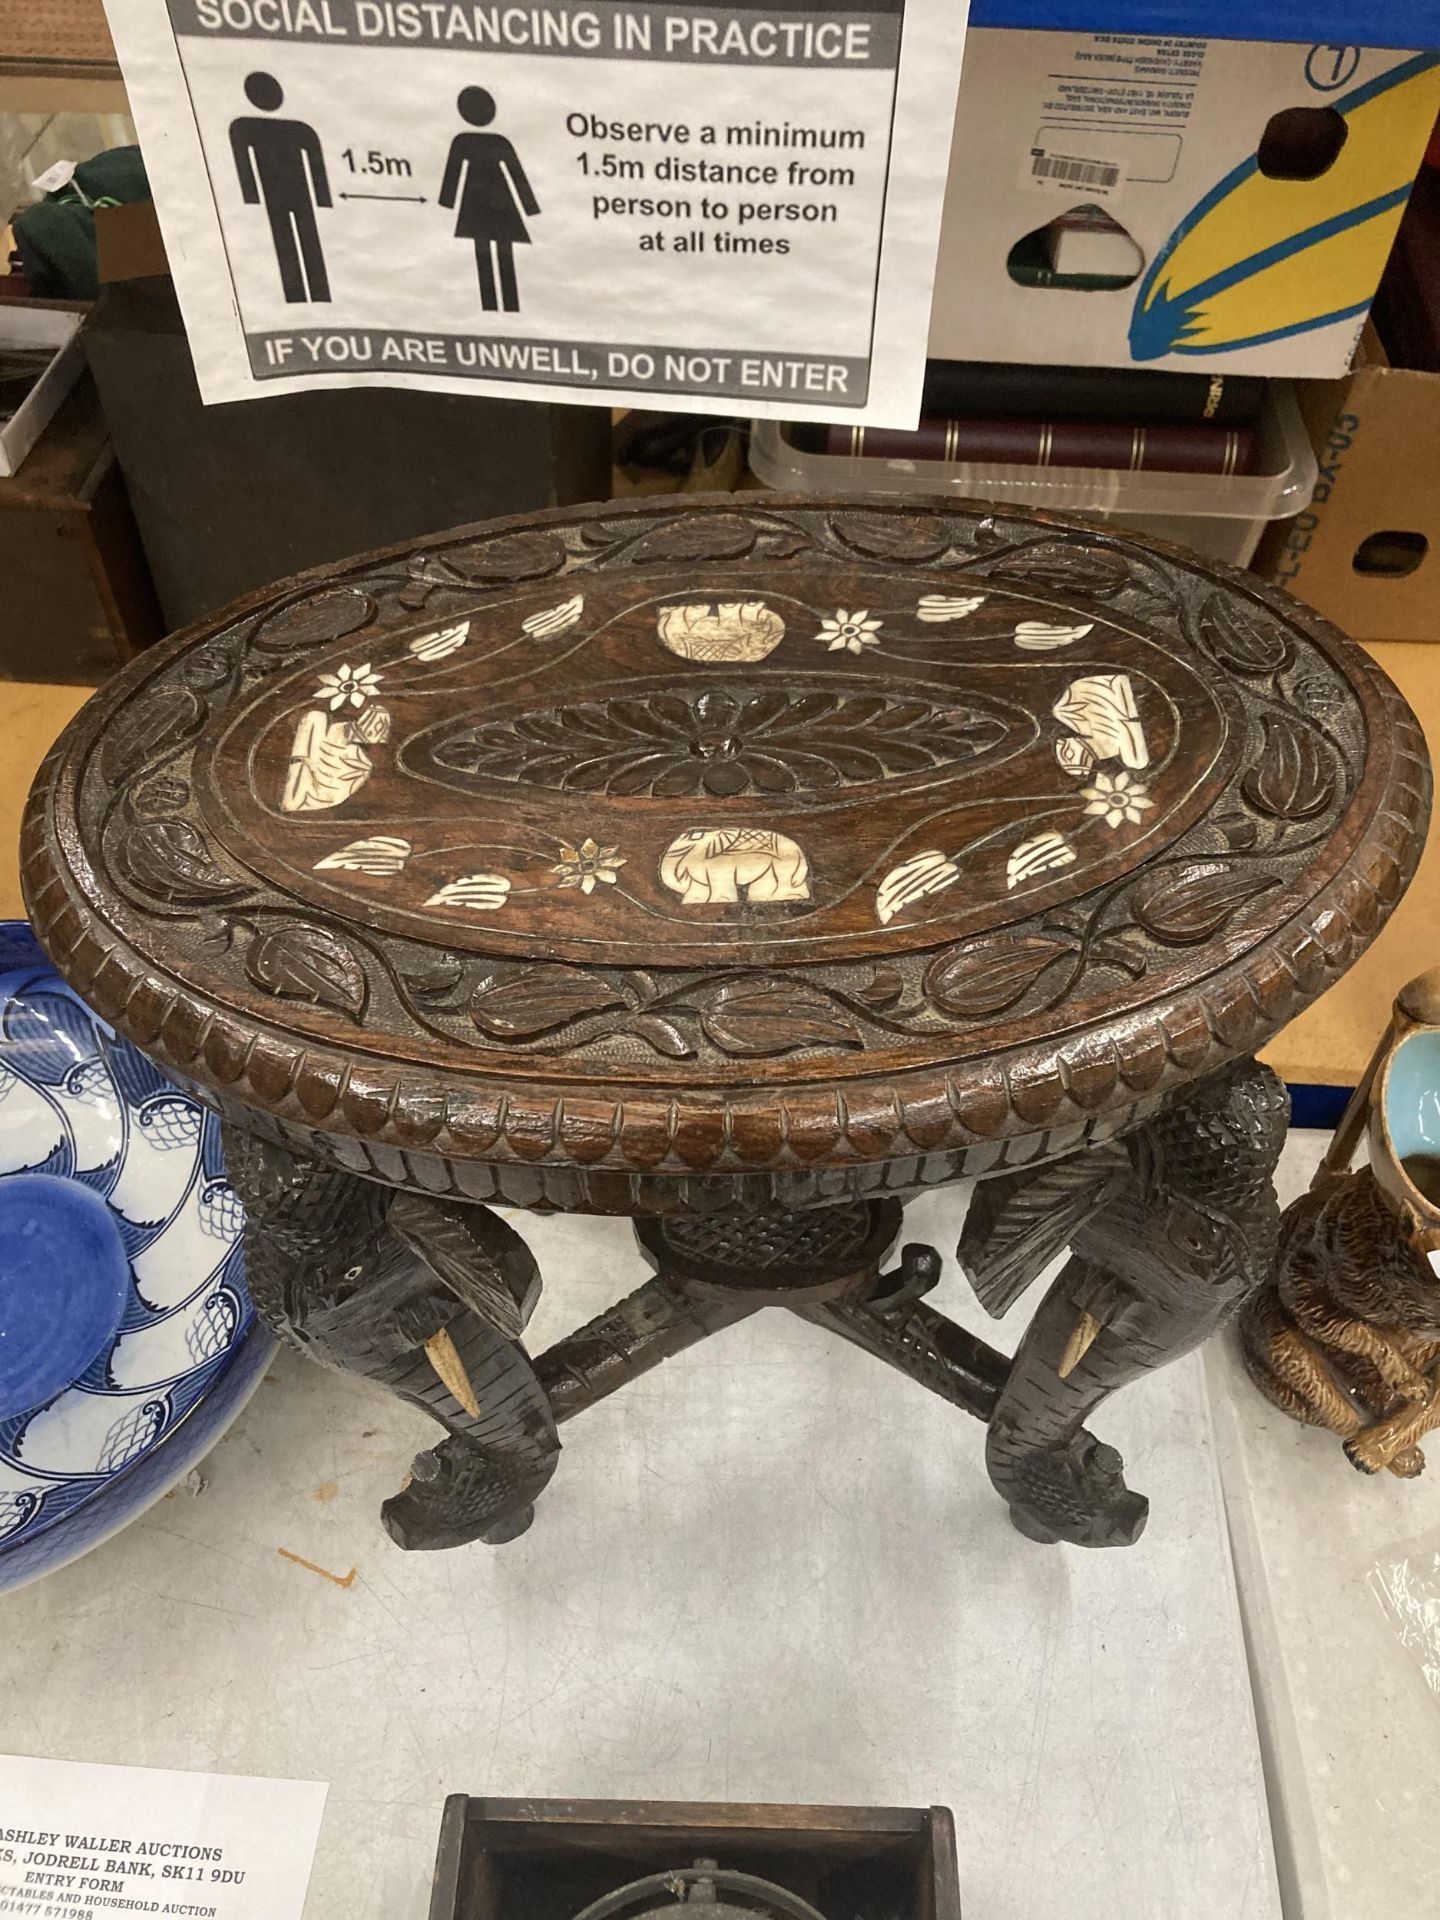 AN ORIENTAL CARVED HARDWOOD TABLE WITH ELEPHANT DESIGN LEGS